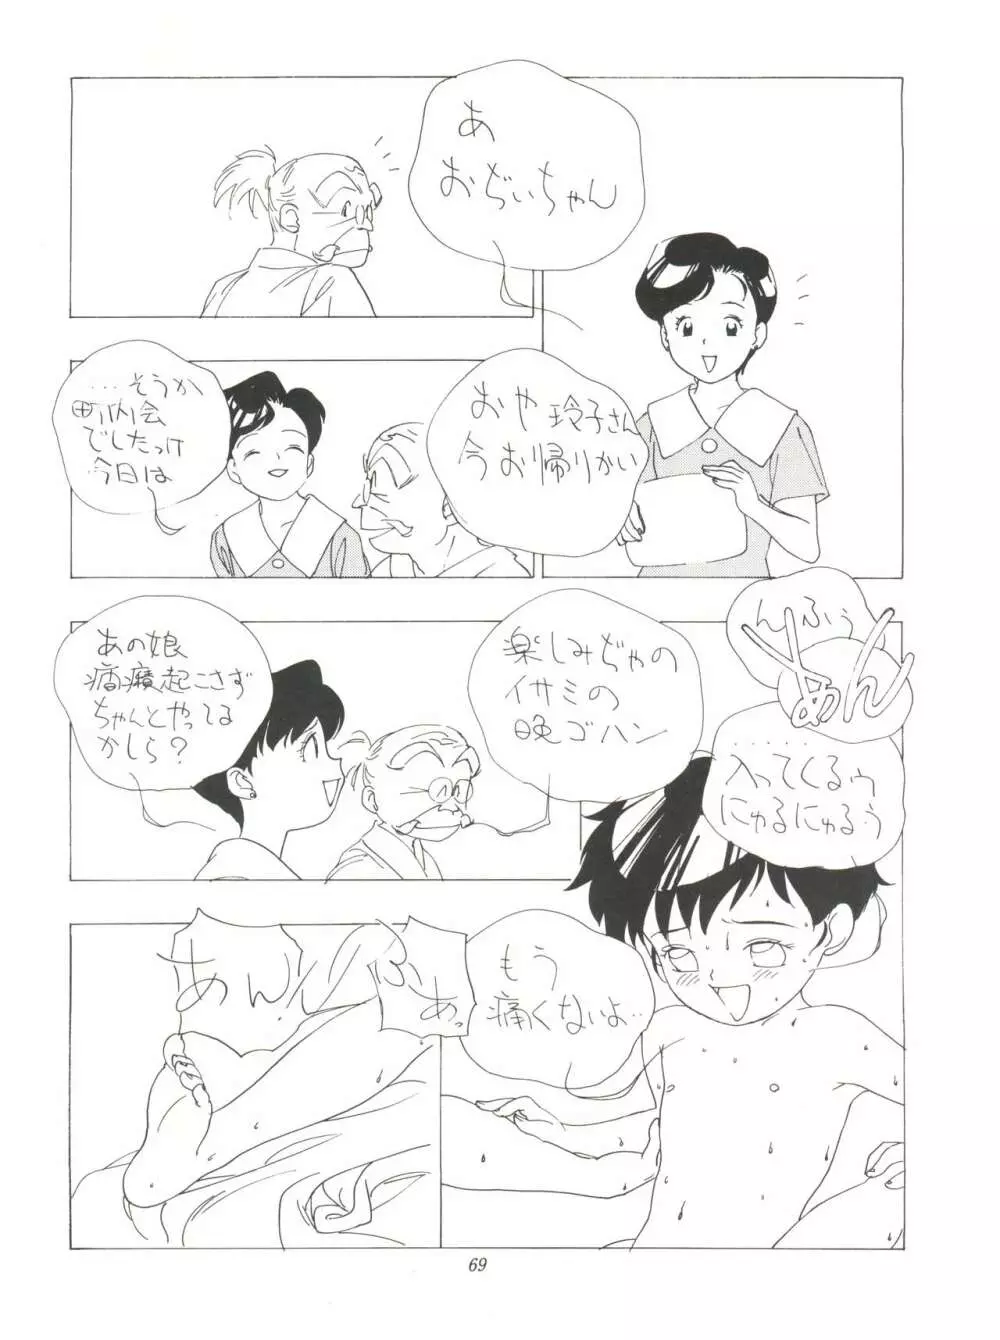 FLY! ISAMI!! - page73